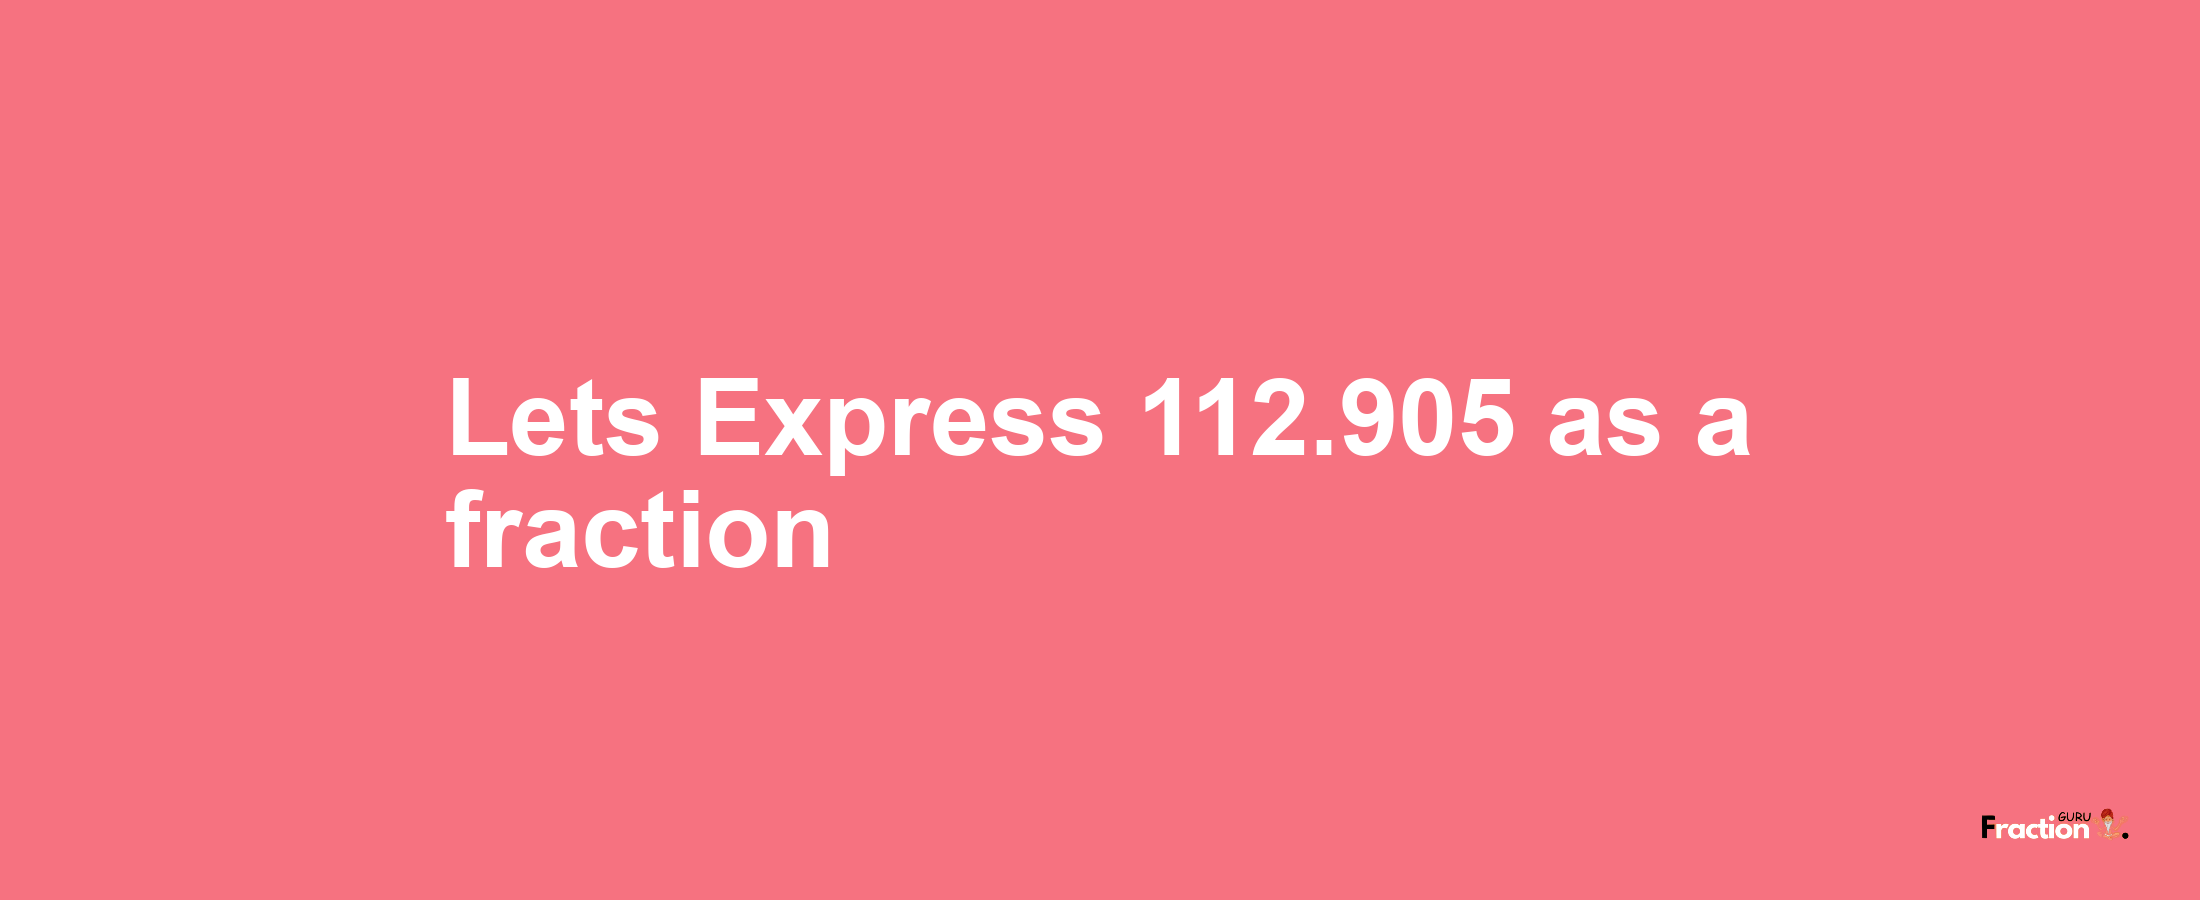 Lets Express 112.905 as afraction